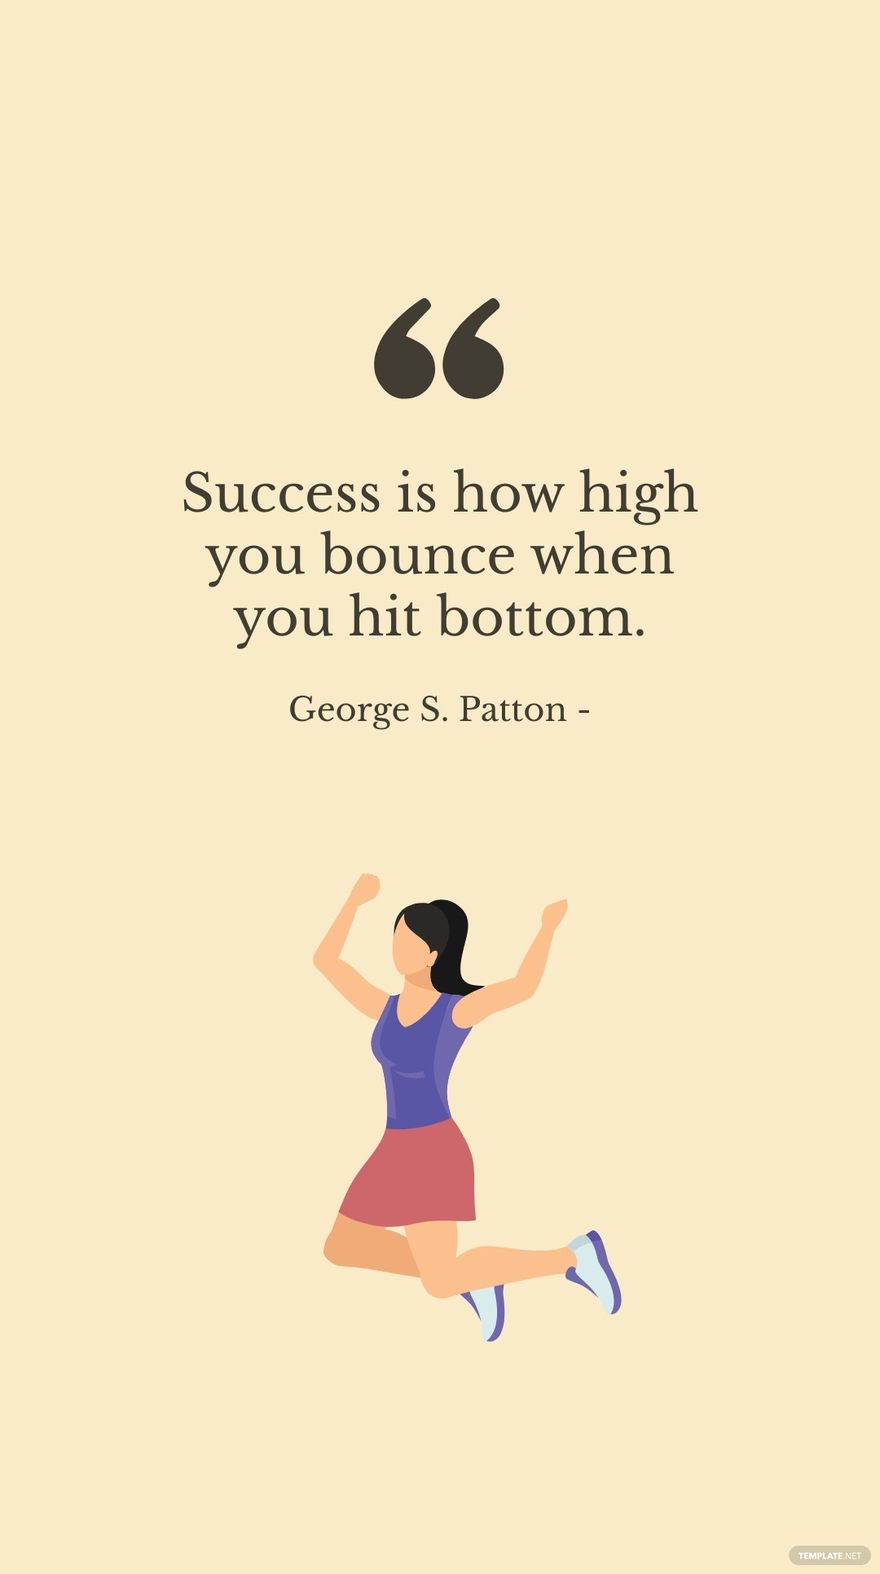 George S. Patton - Success is how high you bounce when you hit bottom.